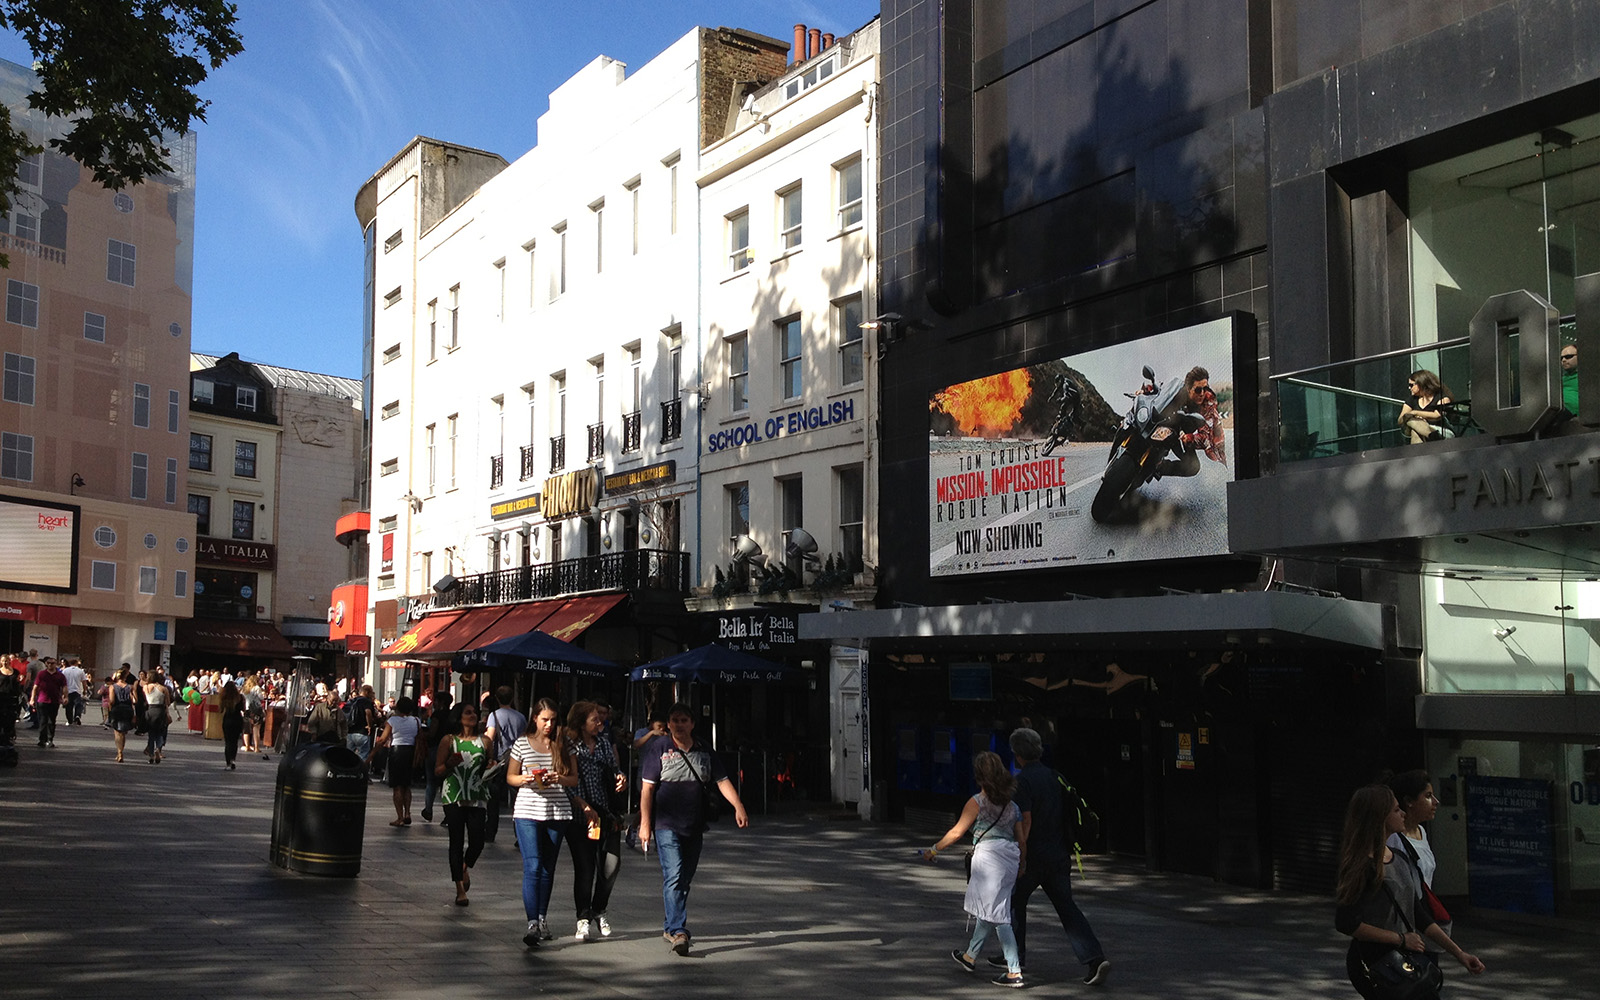 Leicester Square, 23 August 2015